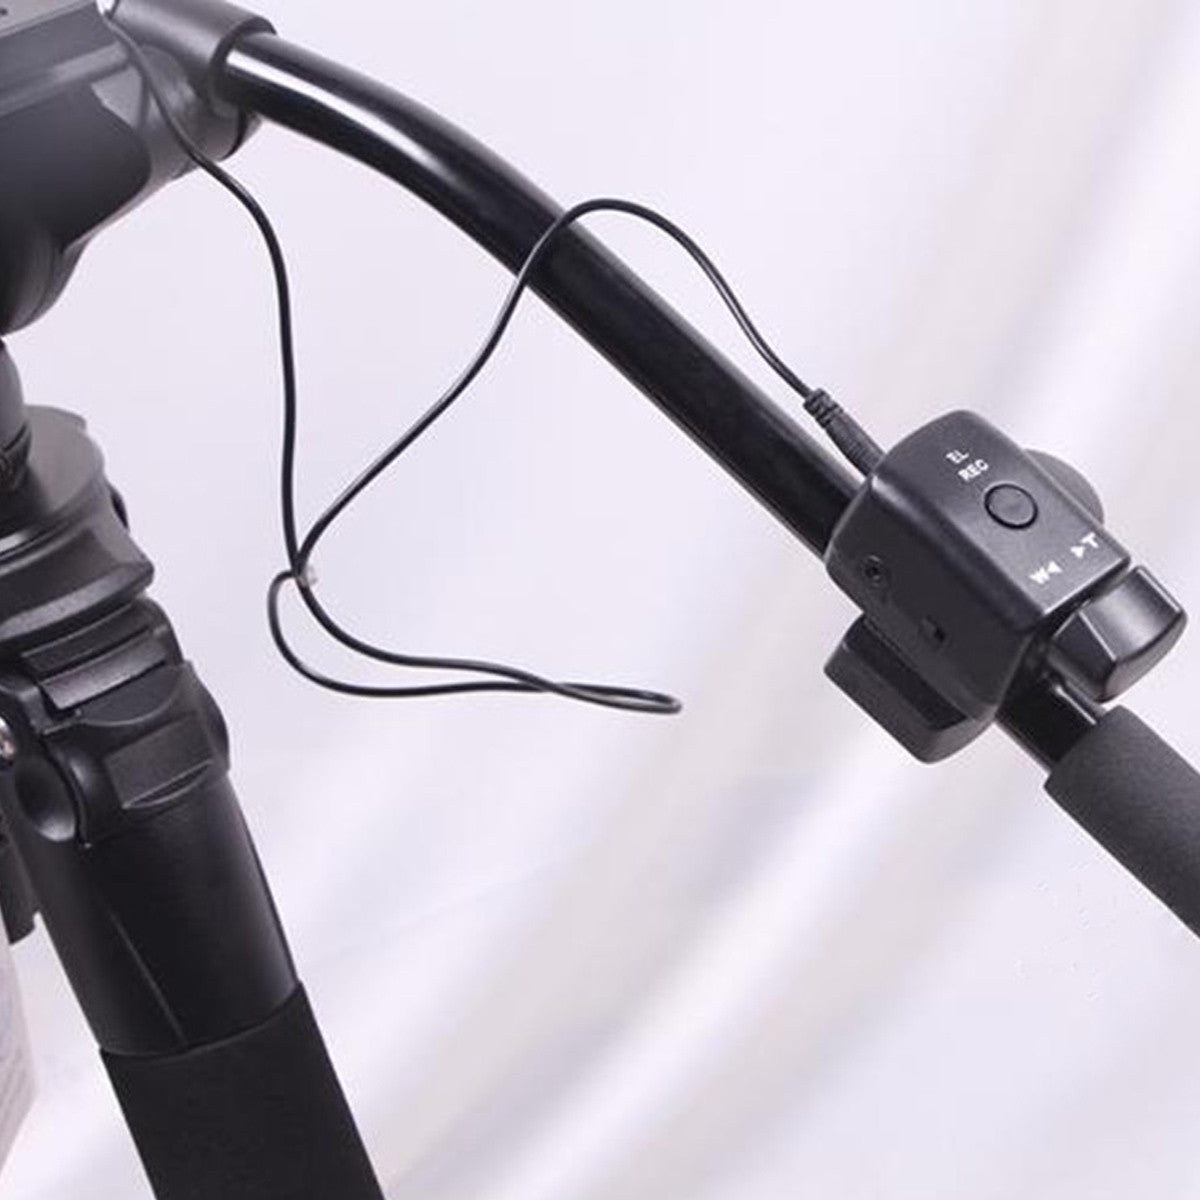 DSLR Pro Zoom Control For Sony Panasonic Remote Controller With Cable